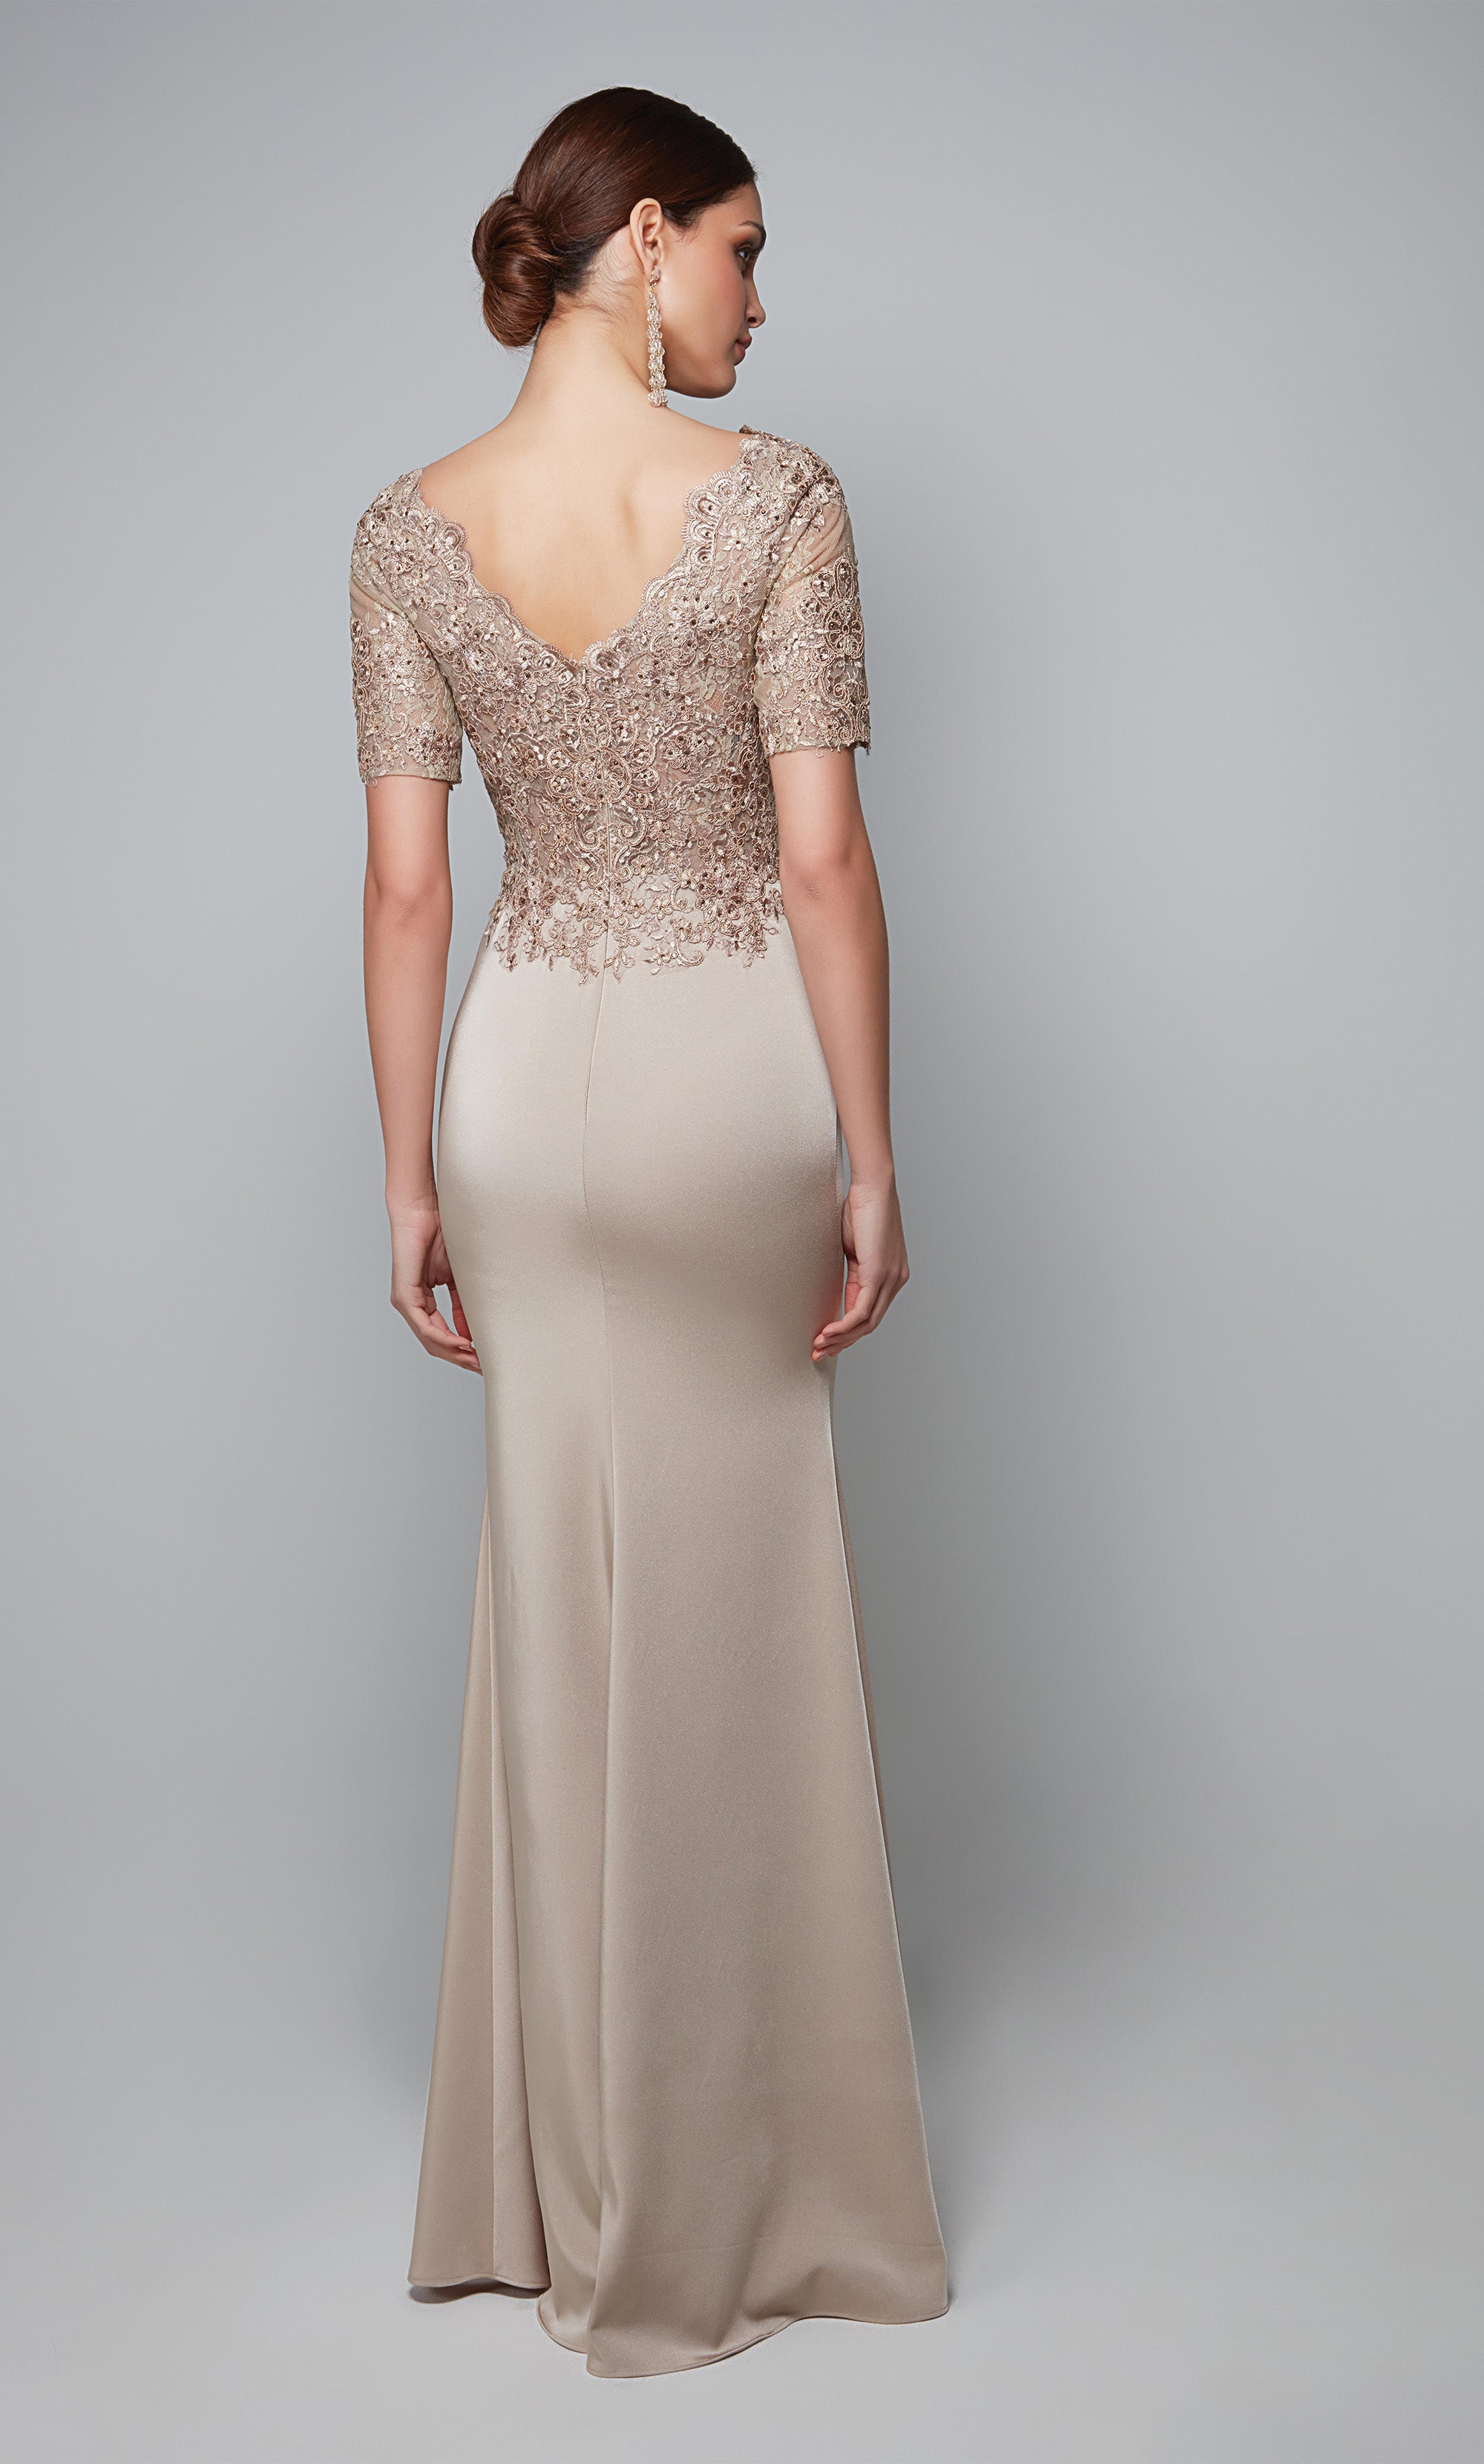 Champagne & Lace  Bridal, Prom, Special Occasion Boutique in